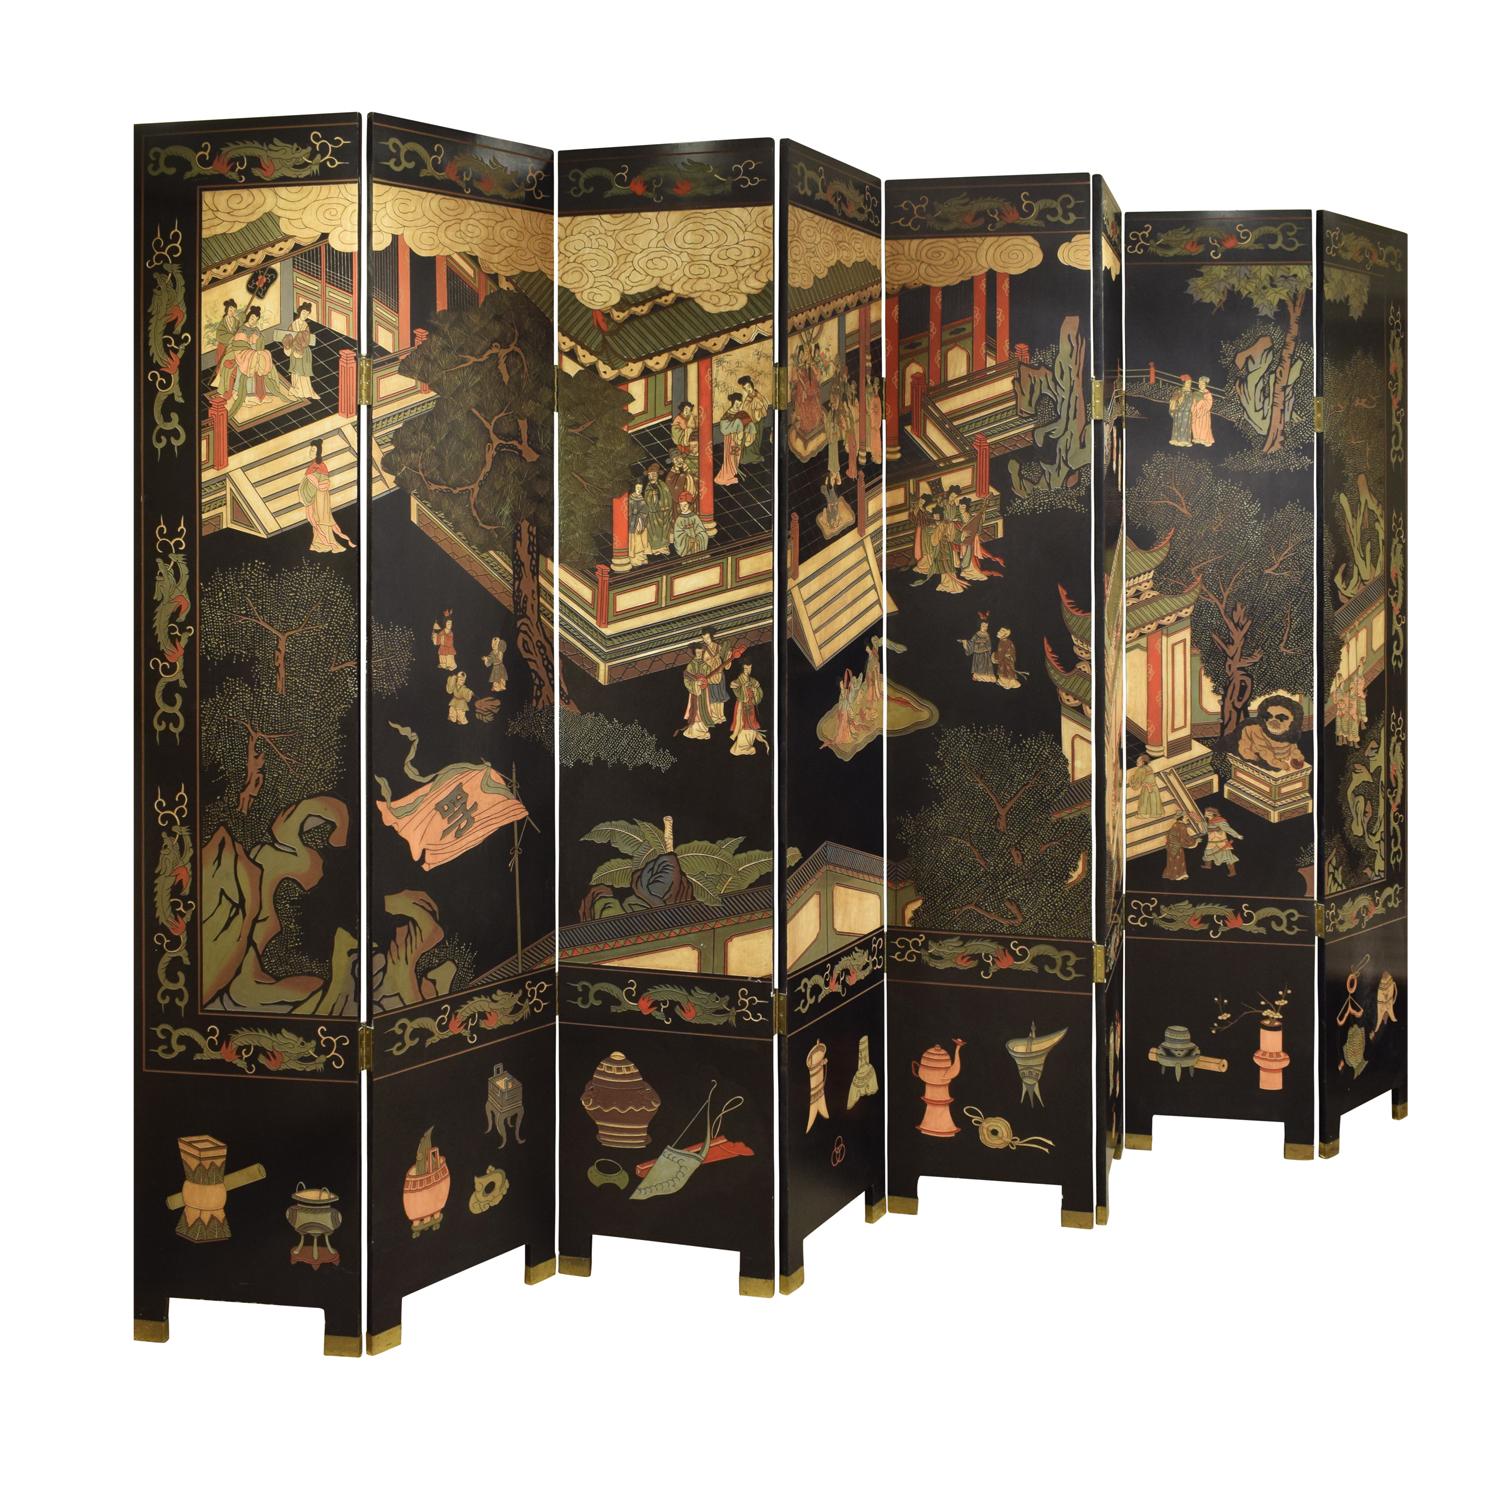 8-panel hand carved Chinese Coromandel lacquered screen with the depiction of a joyous ceremony, 19th century, China. Brass sabots on legs.